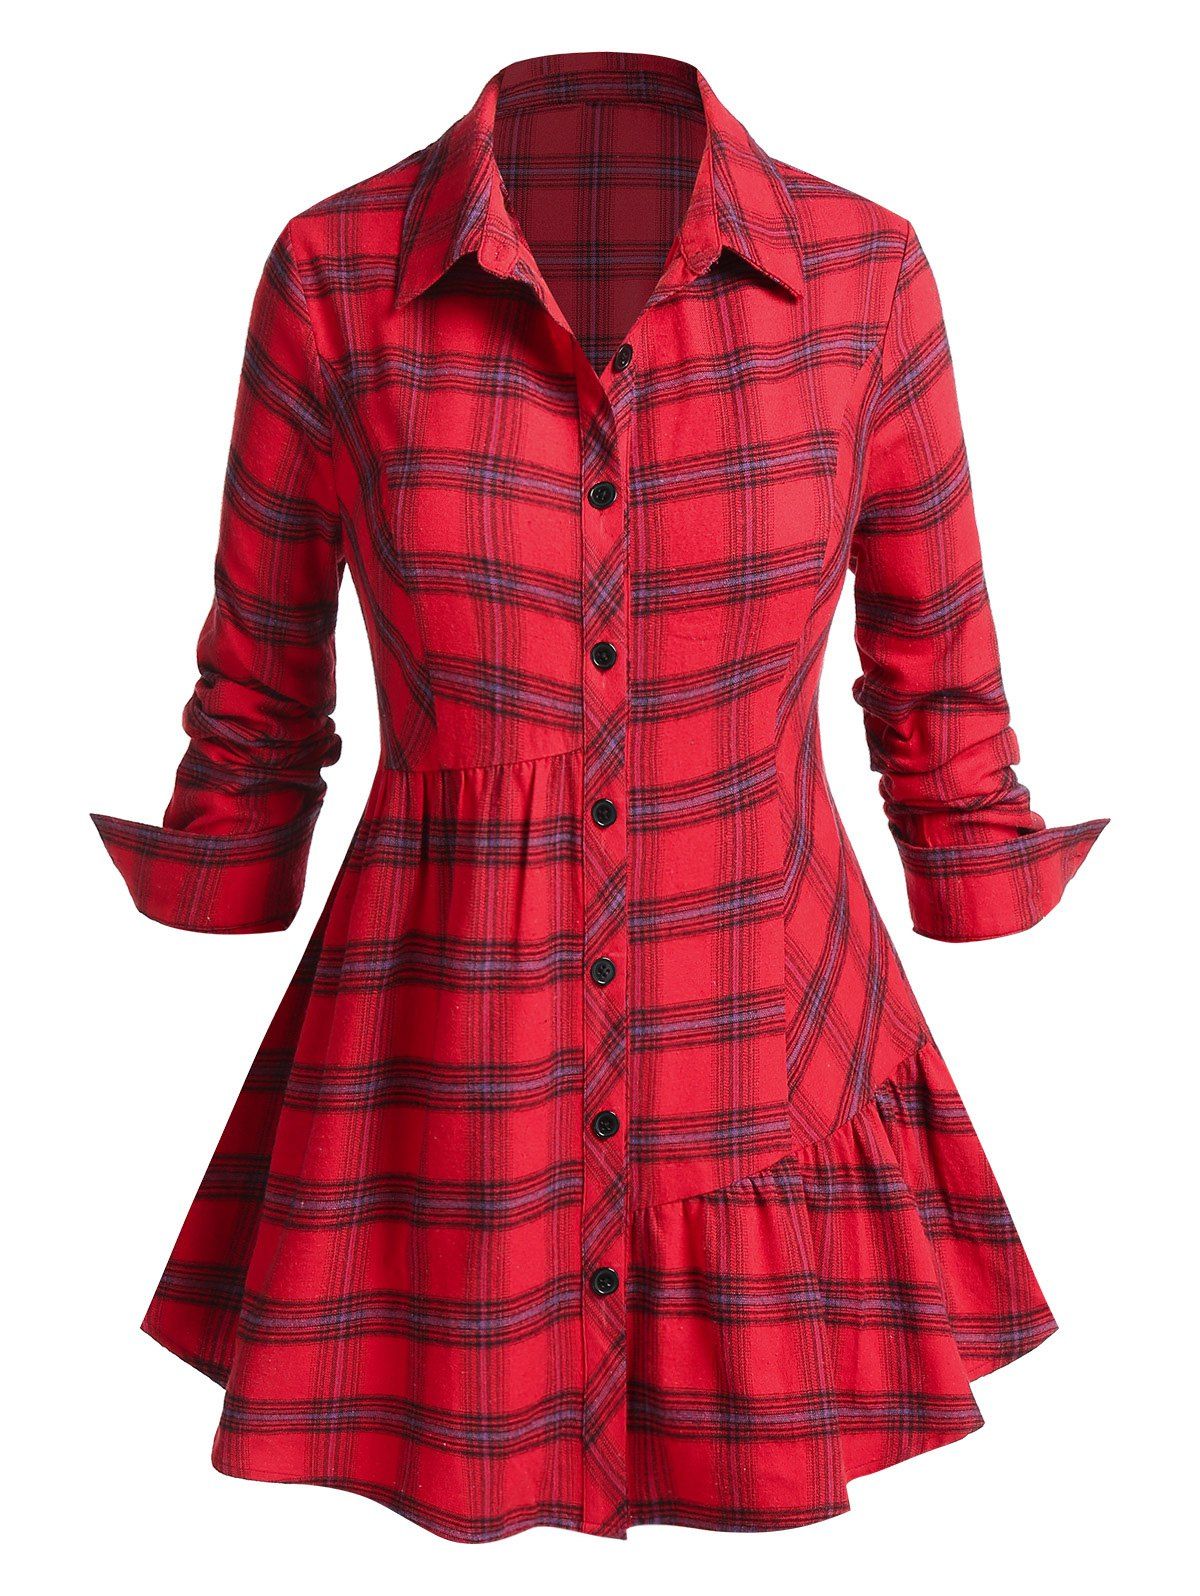 Plus Size Striped Plaid Skirted Flounce Shirt - RED 5X